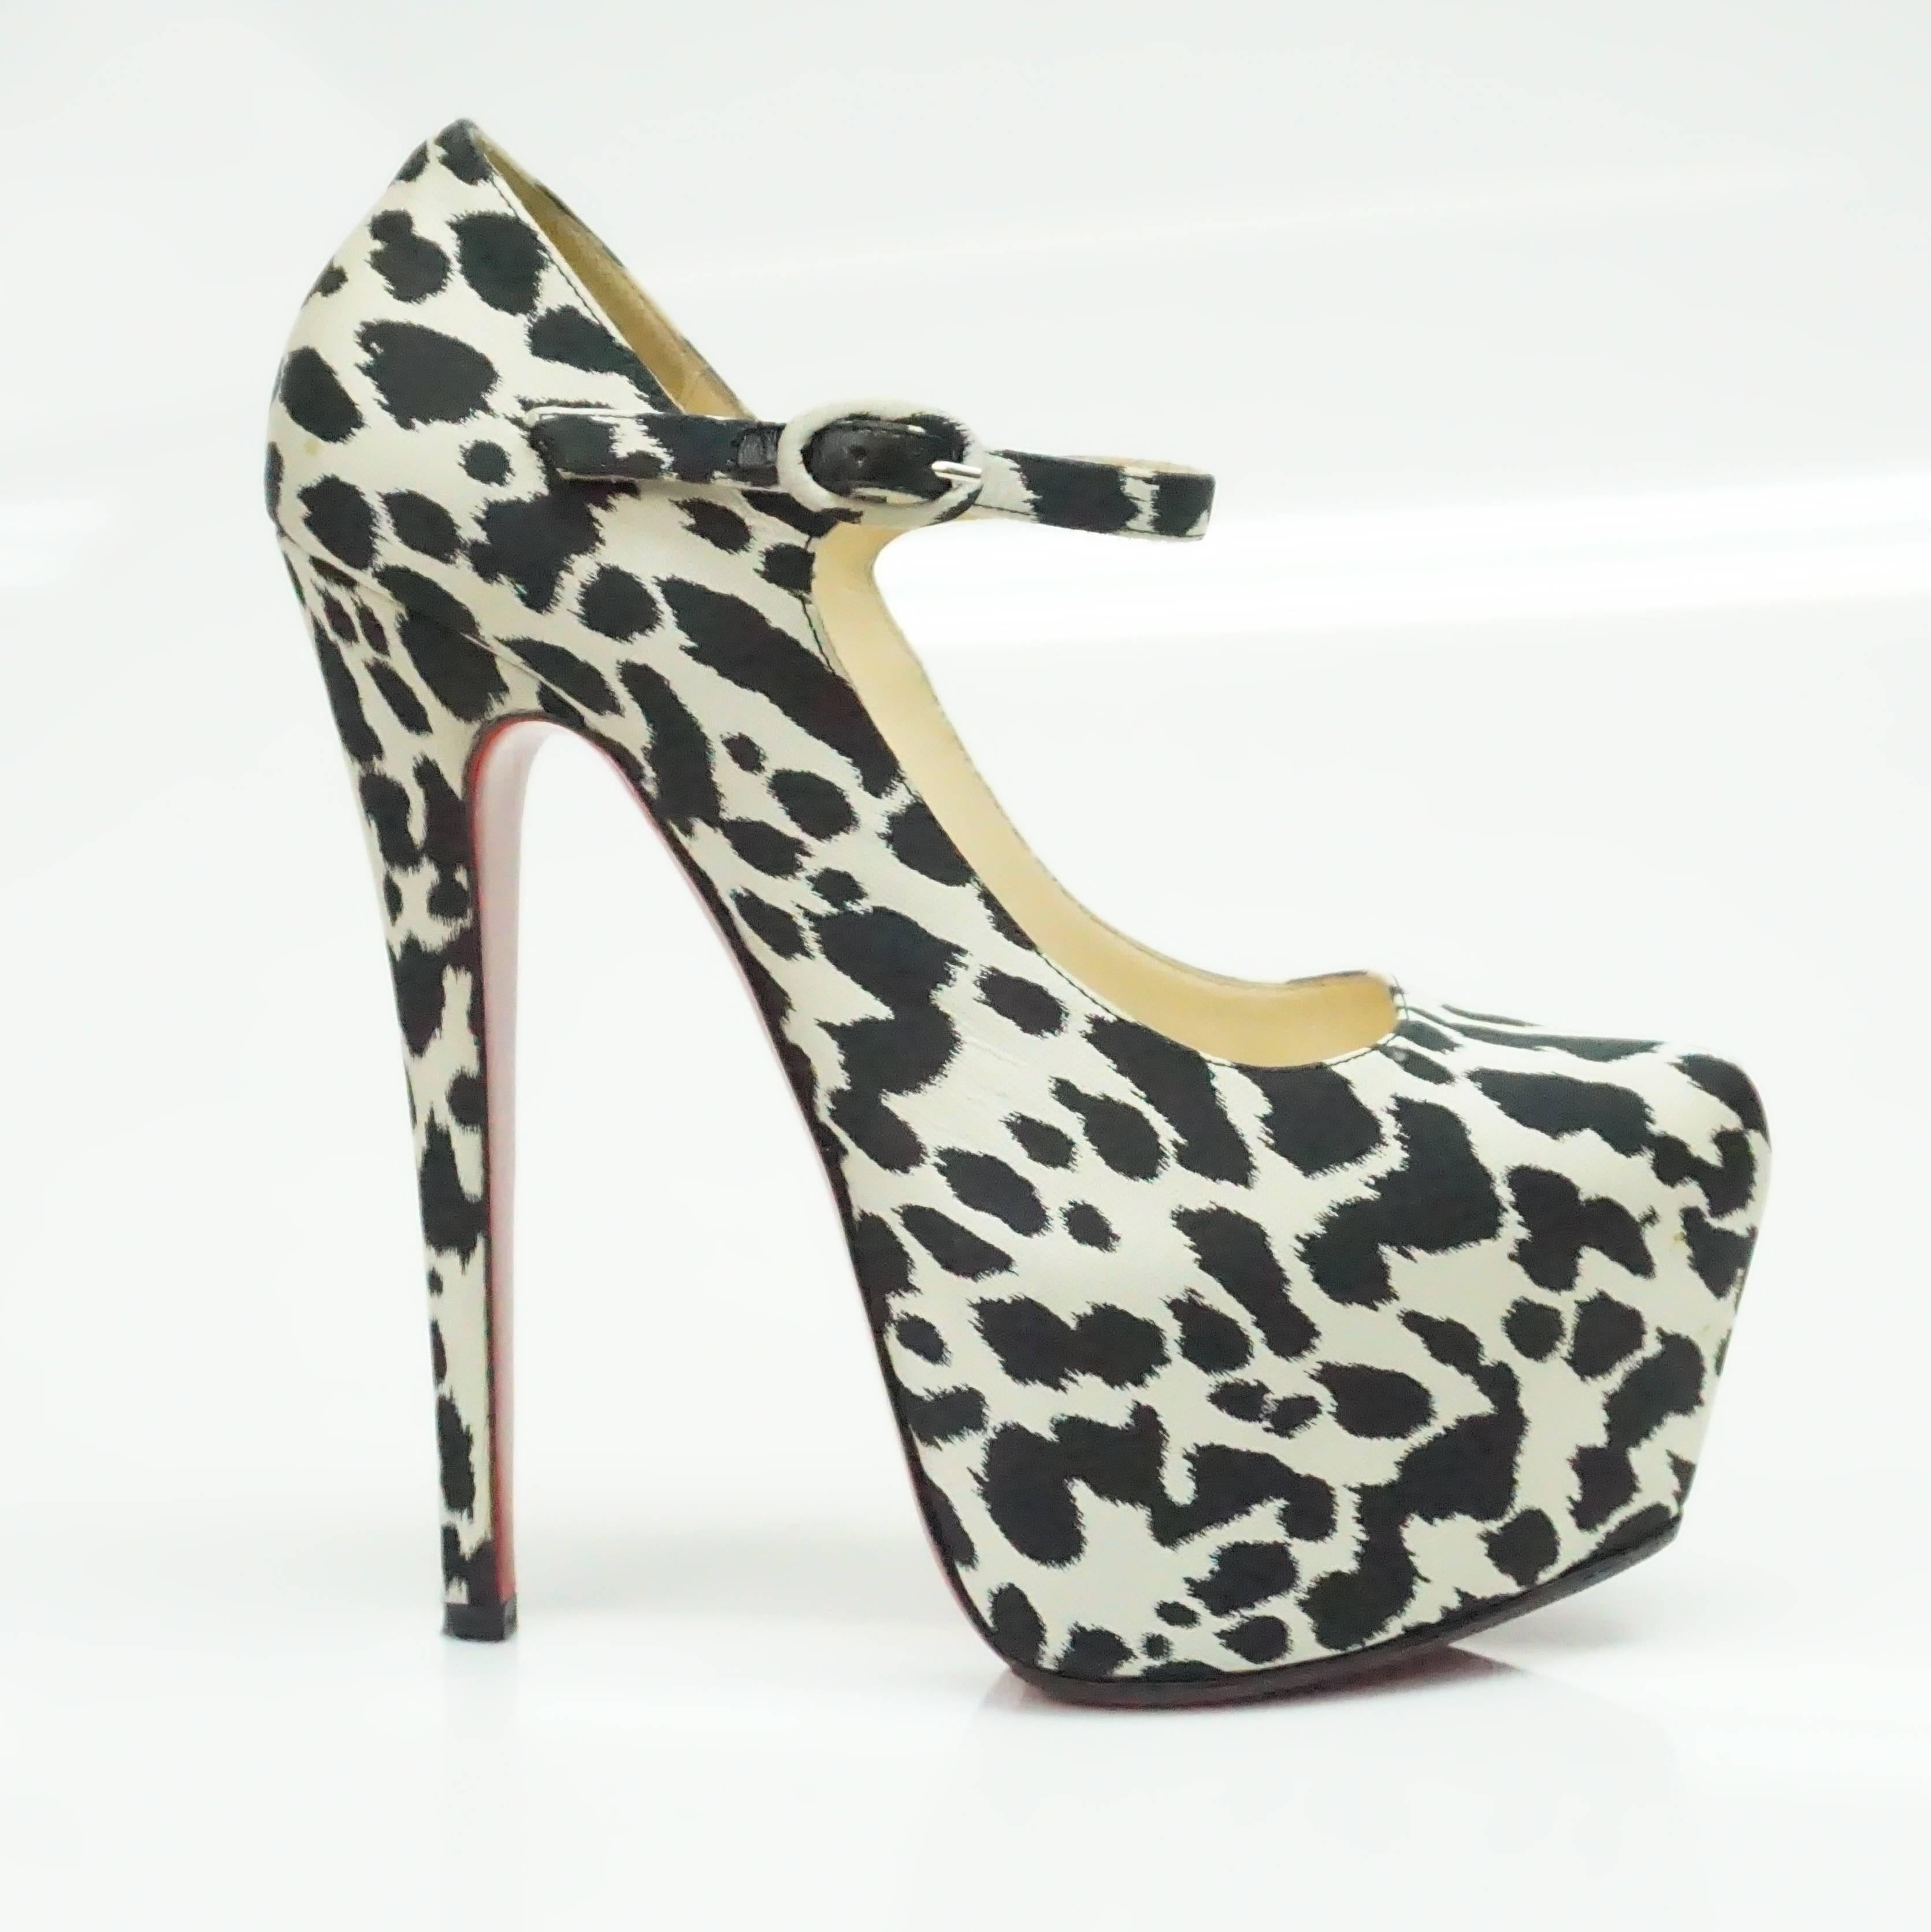 Christian Louboutin Black and White Lady Daf Leopard Mary Jane Pump -  36  These amazing leopard print pumps are in very good condition with some minor wear. The shoe is completely covered in a silk leopard print material and has an ankle strap. The